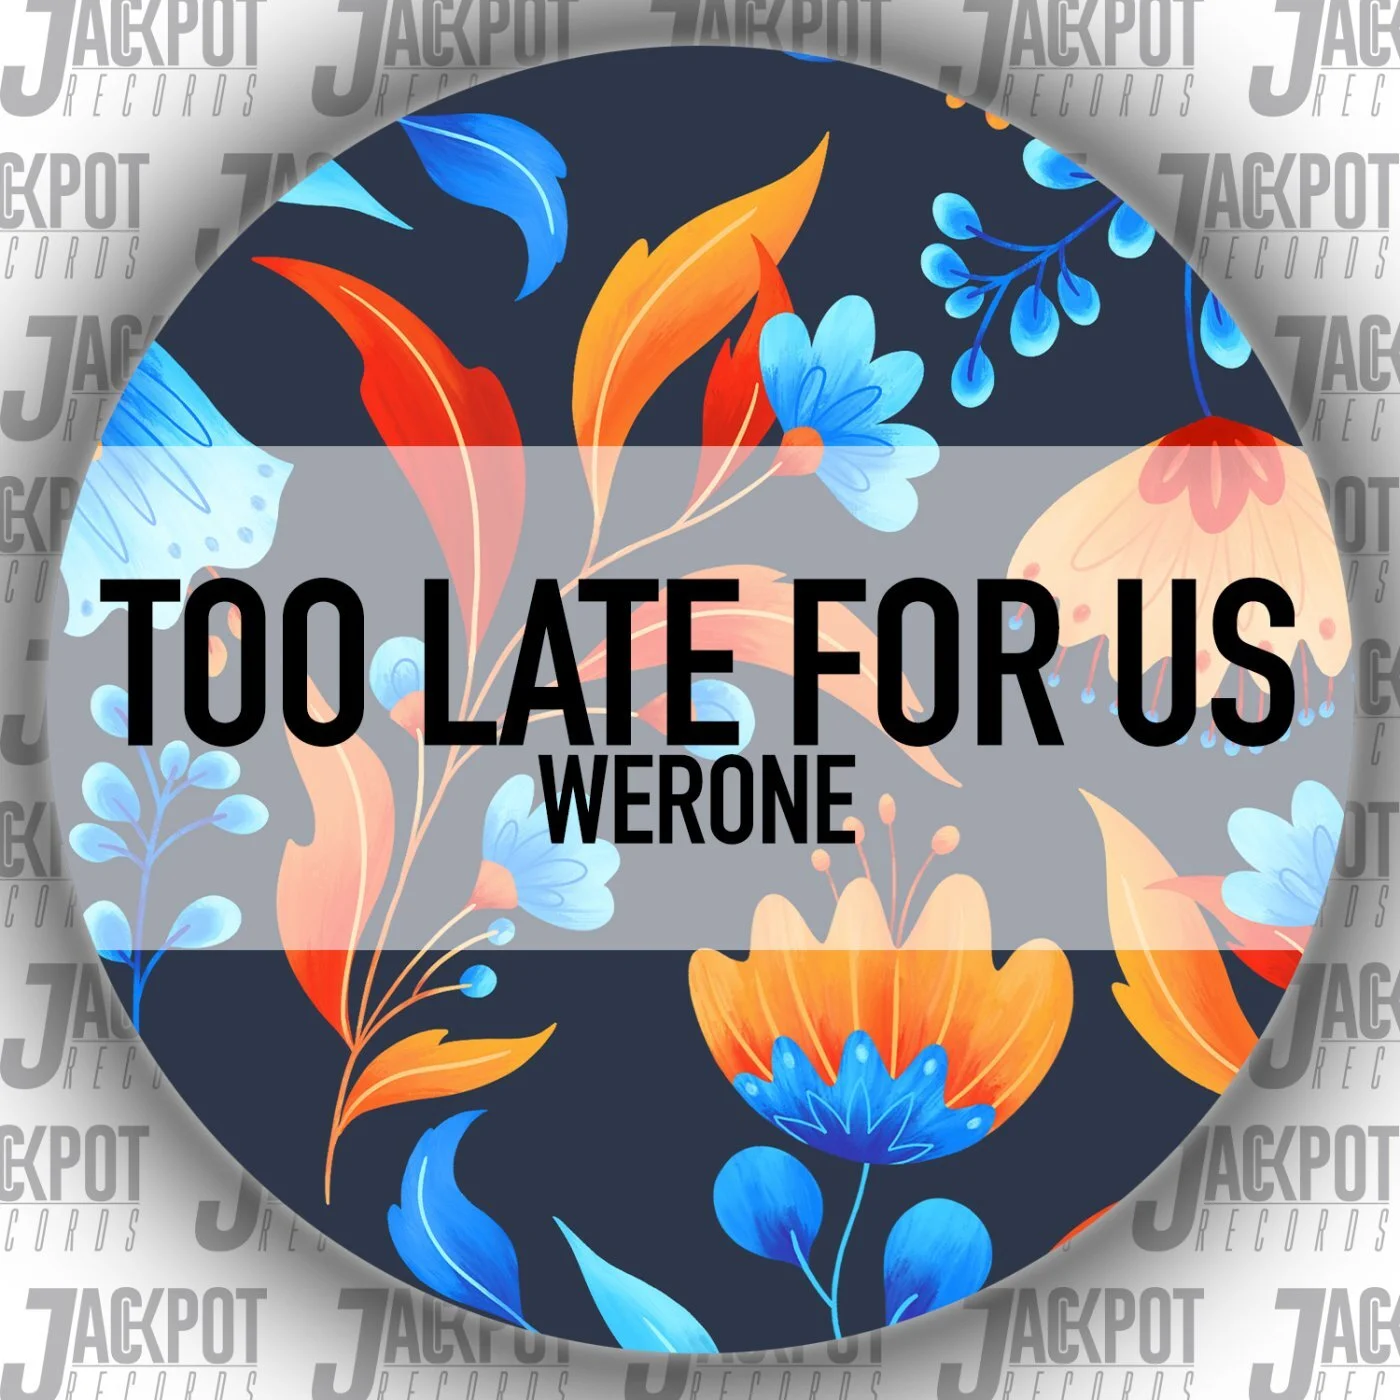 Werone Hr - Too Late For Us (Original Mix)